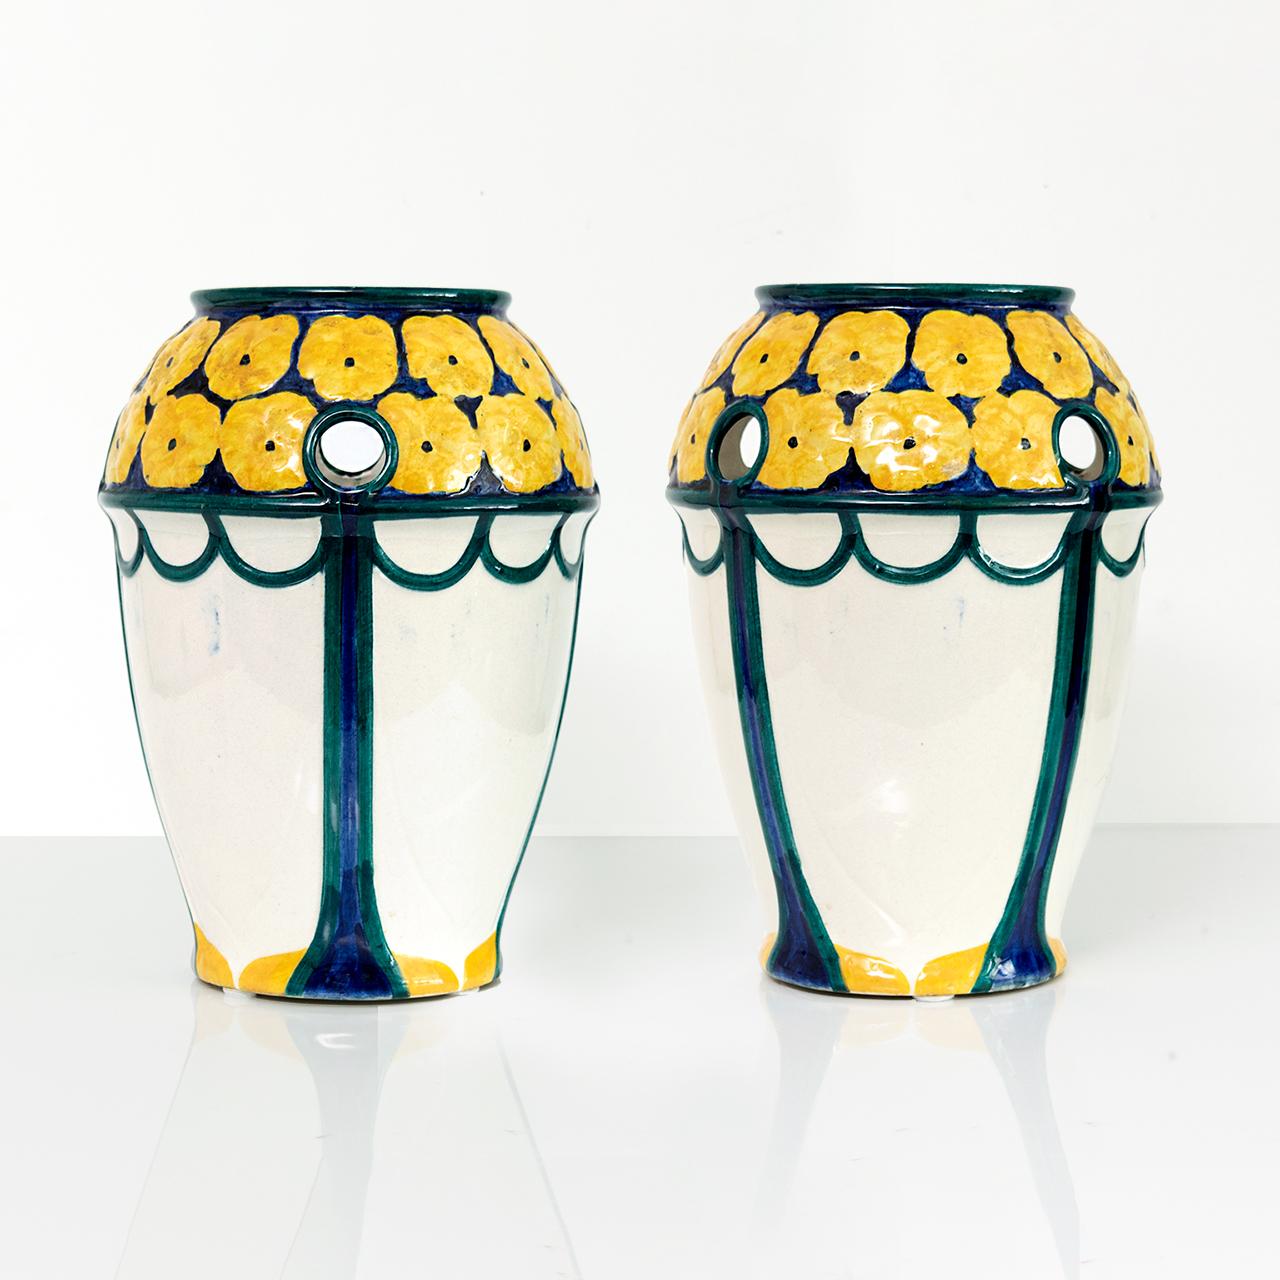 Pair of Swedish Art Nouveau period vases with a crown of yellow flowers on a deep blue ground. The vases has small round openings along the top. Designed by Alf Wallander made by Rorstrand, circa 1910. 

Measures: Height 10.75”.